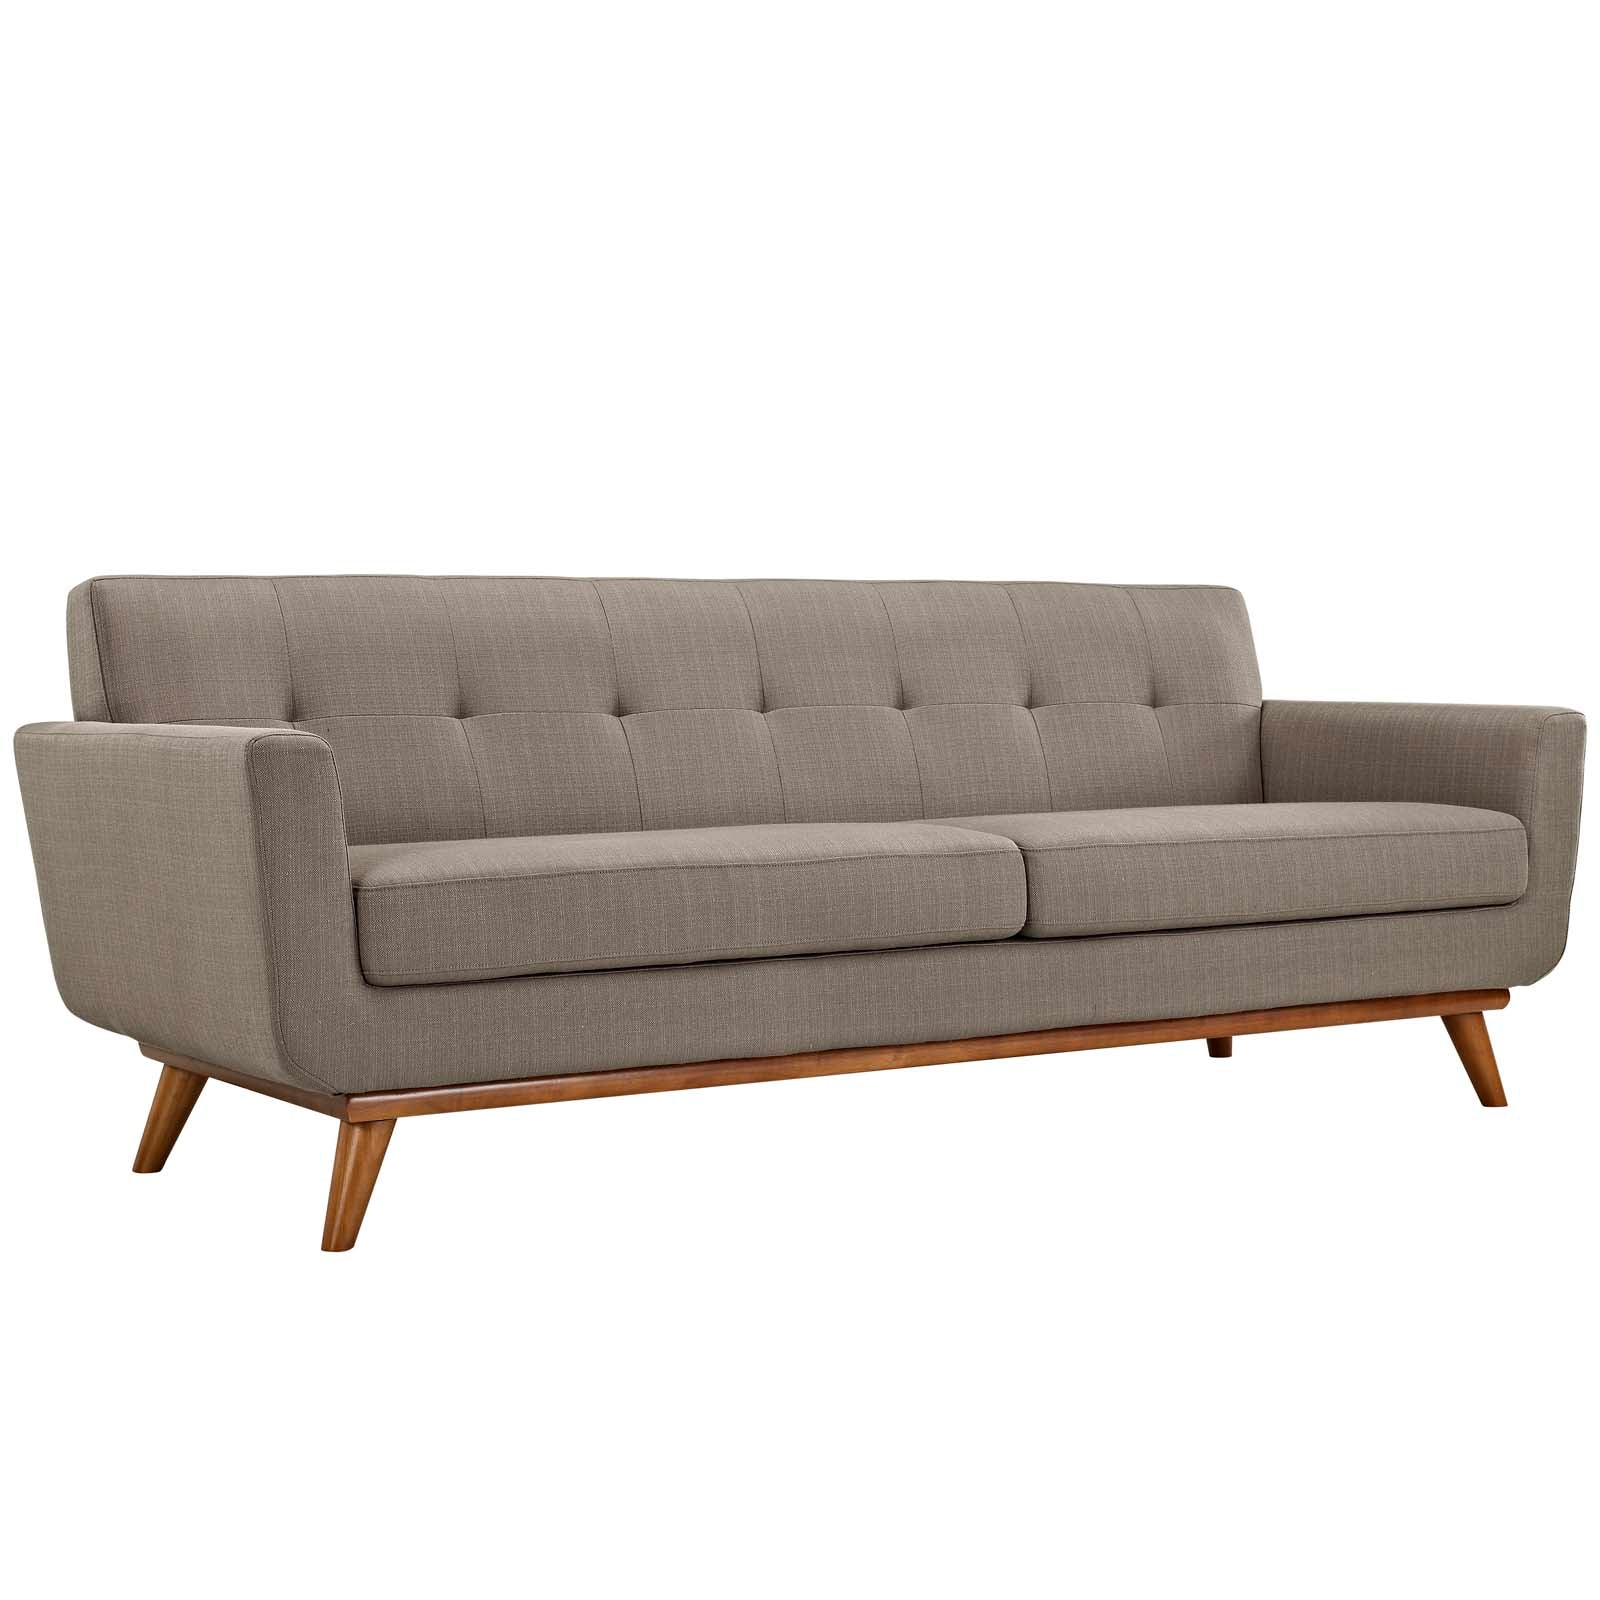 Modway Sofas & Couches - Engage Upholstered Fabric Sofa Granite